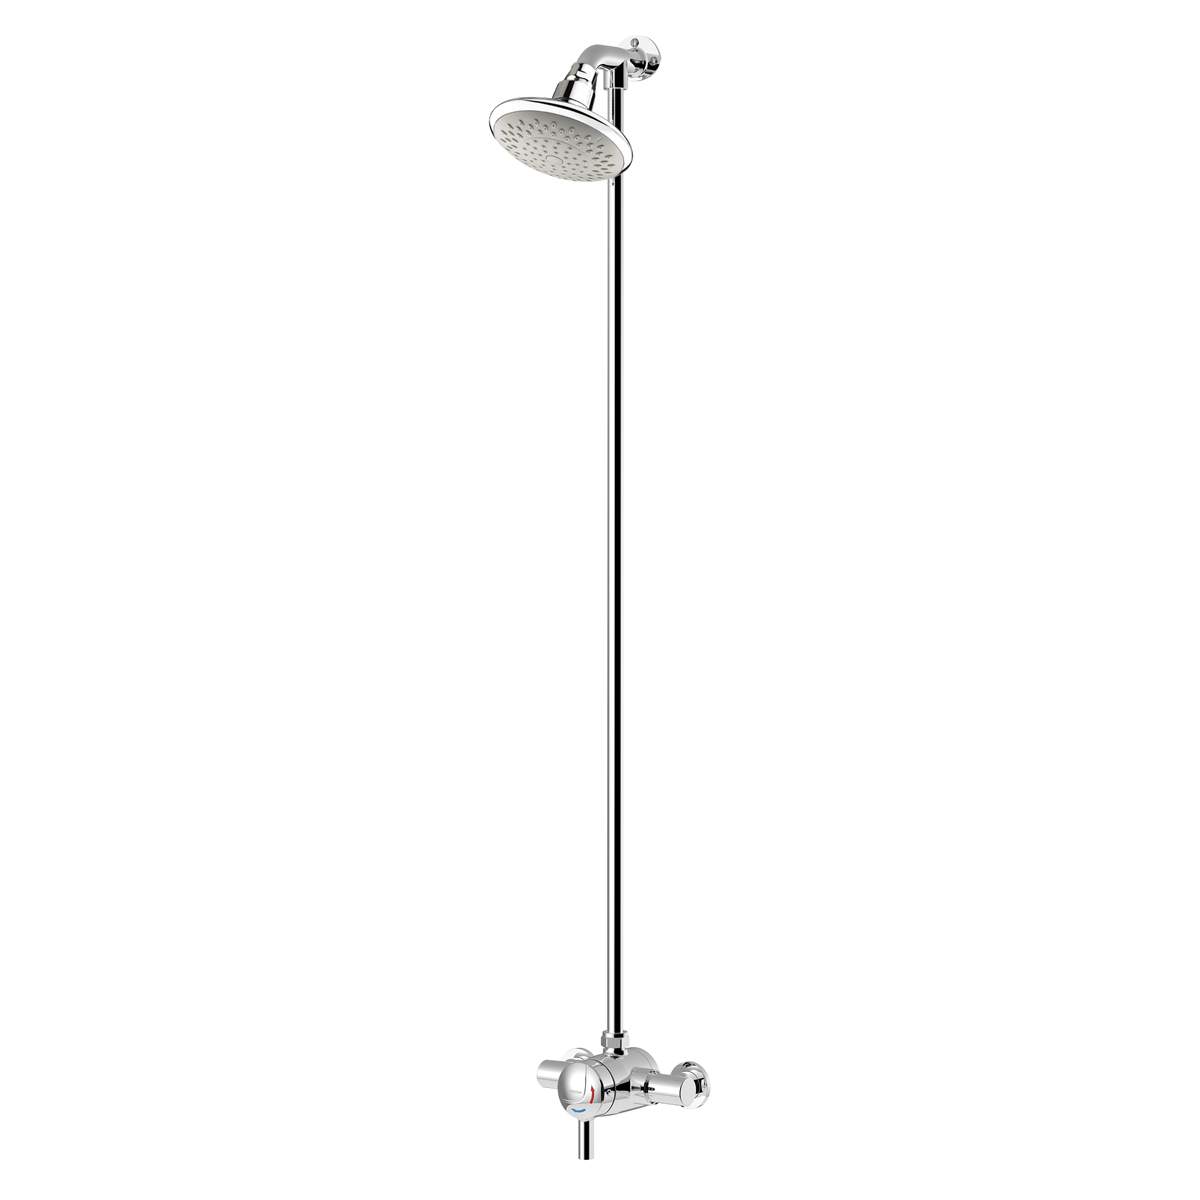 Bristan Thermostatic Exposed Mini Chrome Shower Valve with Top Outlet Rigid Riser (MINI2 TS1203 RR C)